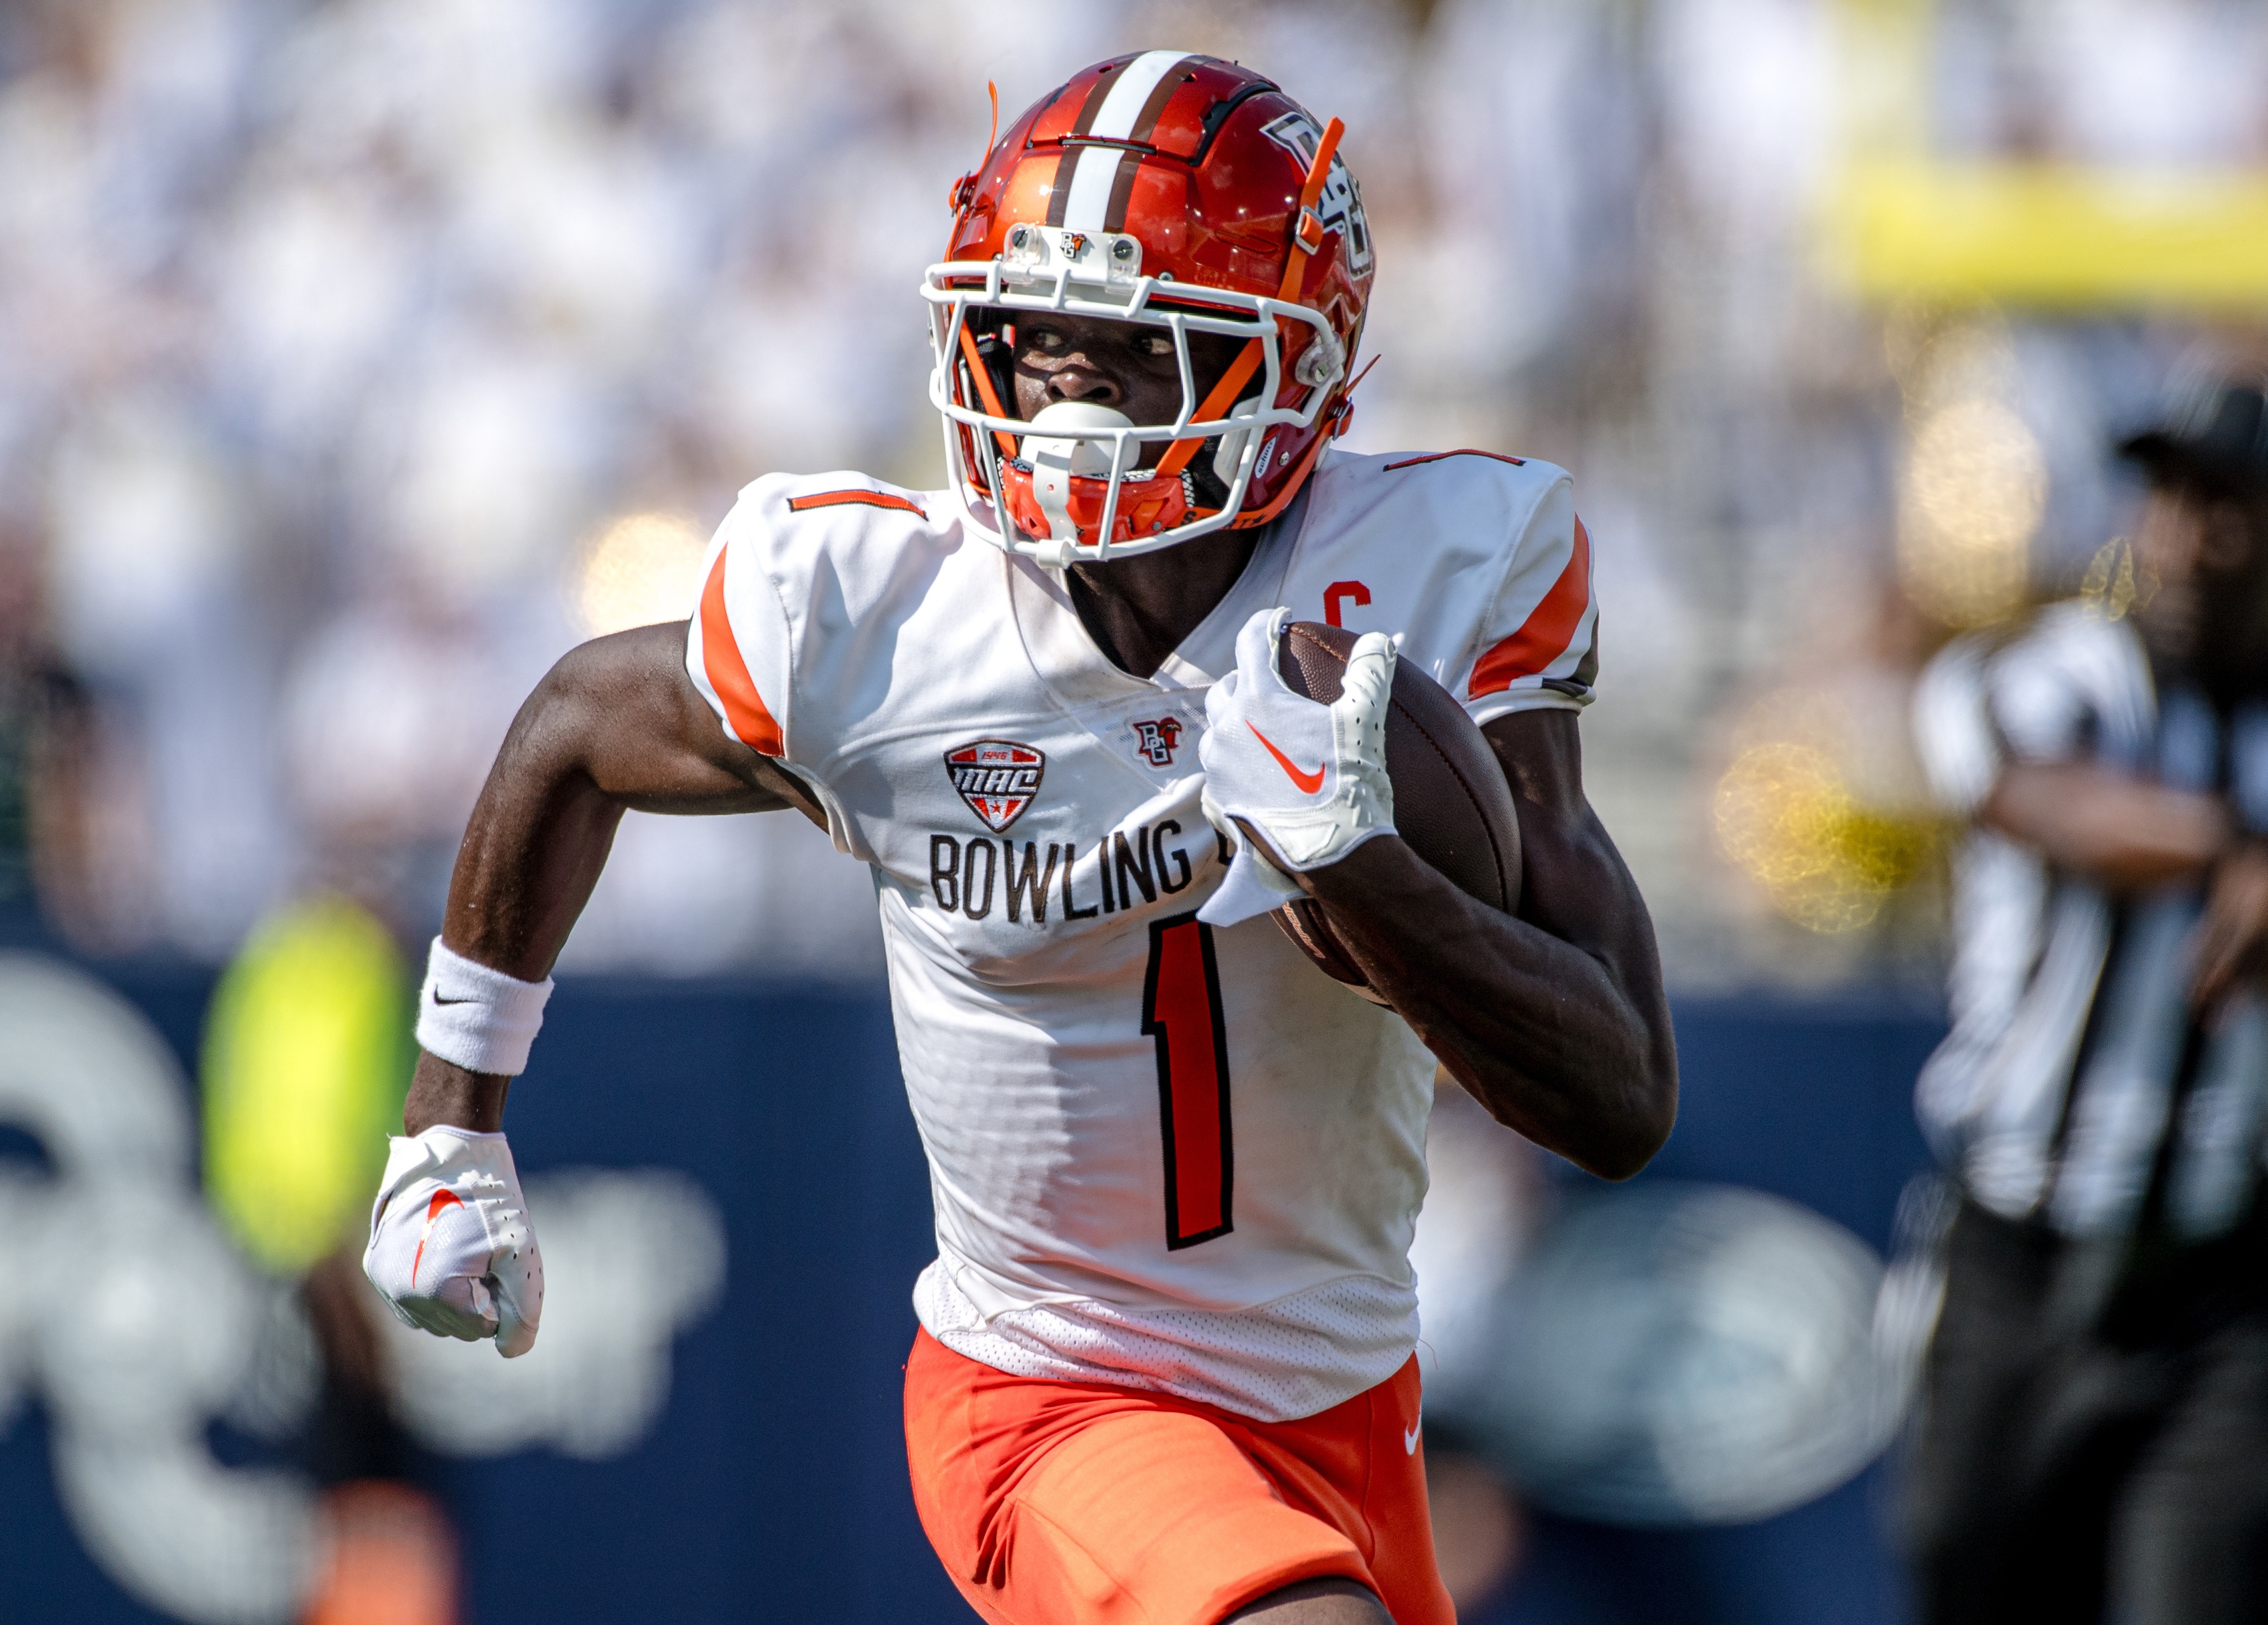 BGSU wide receiver Odieu Hiliare carries the football during a game